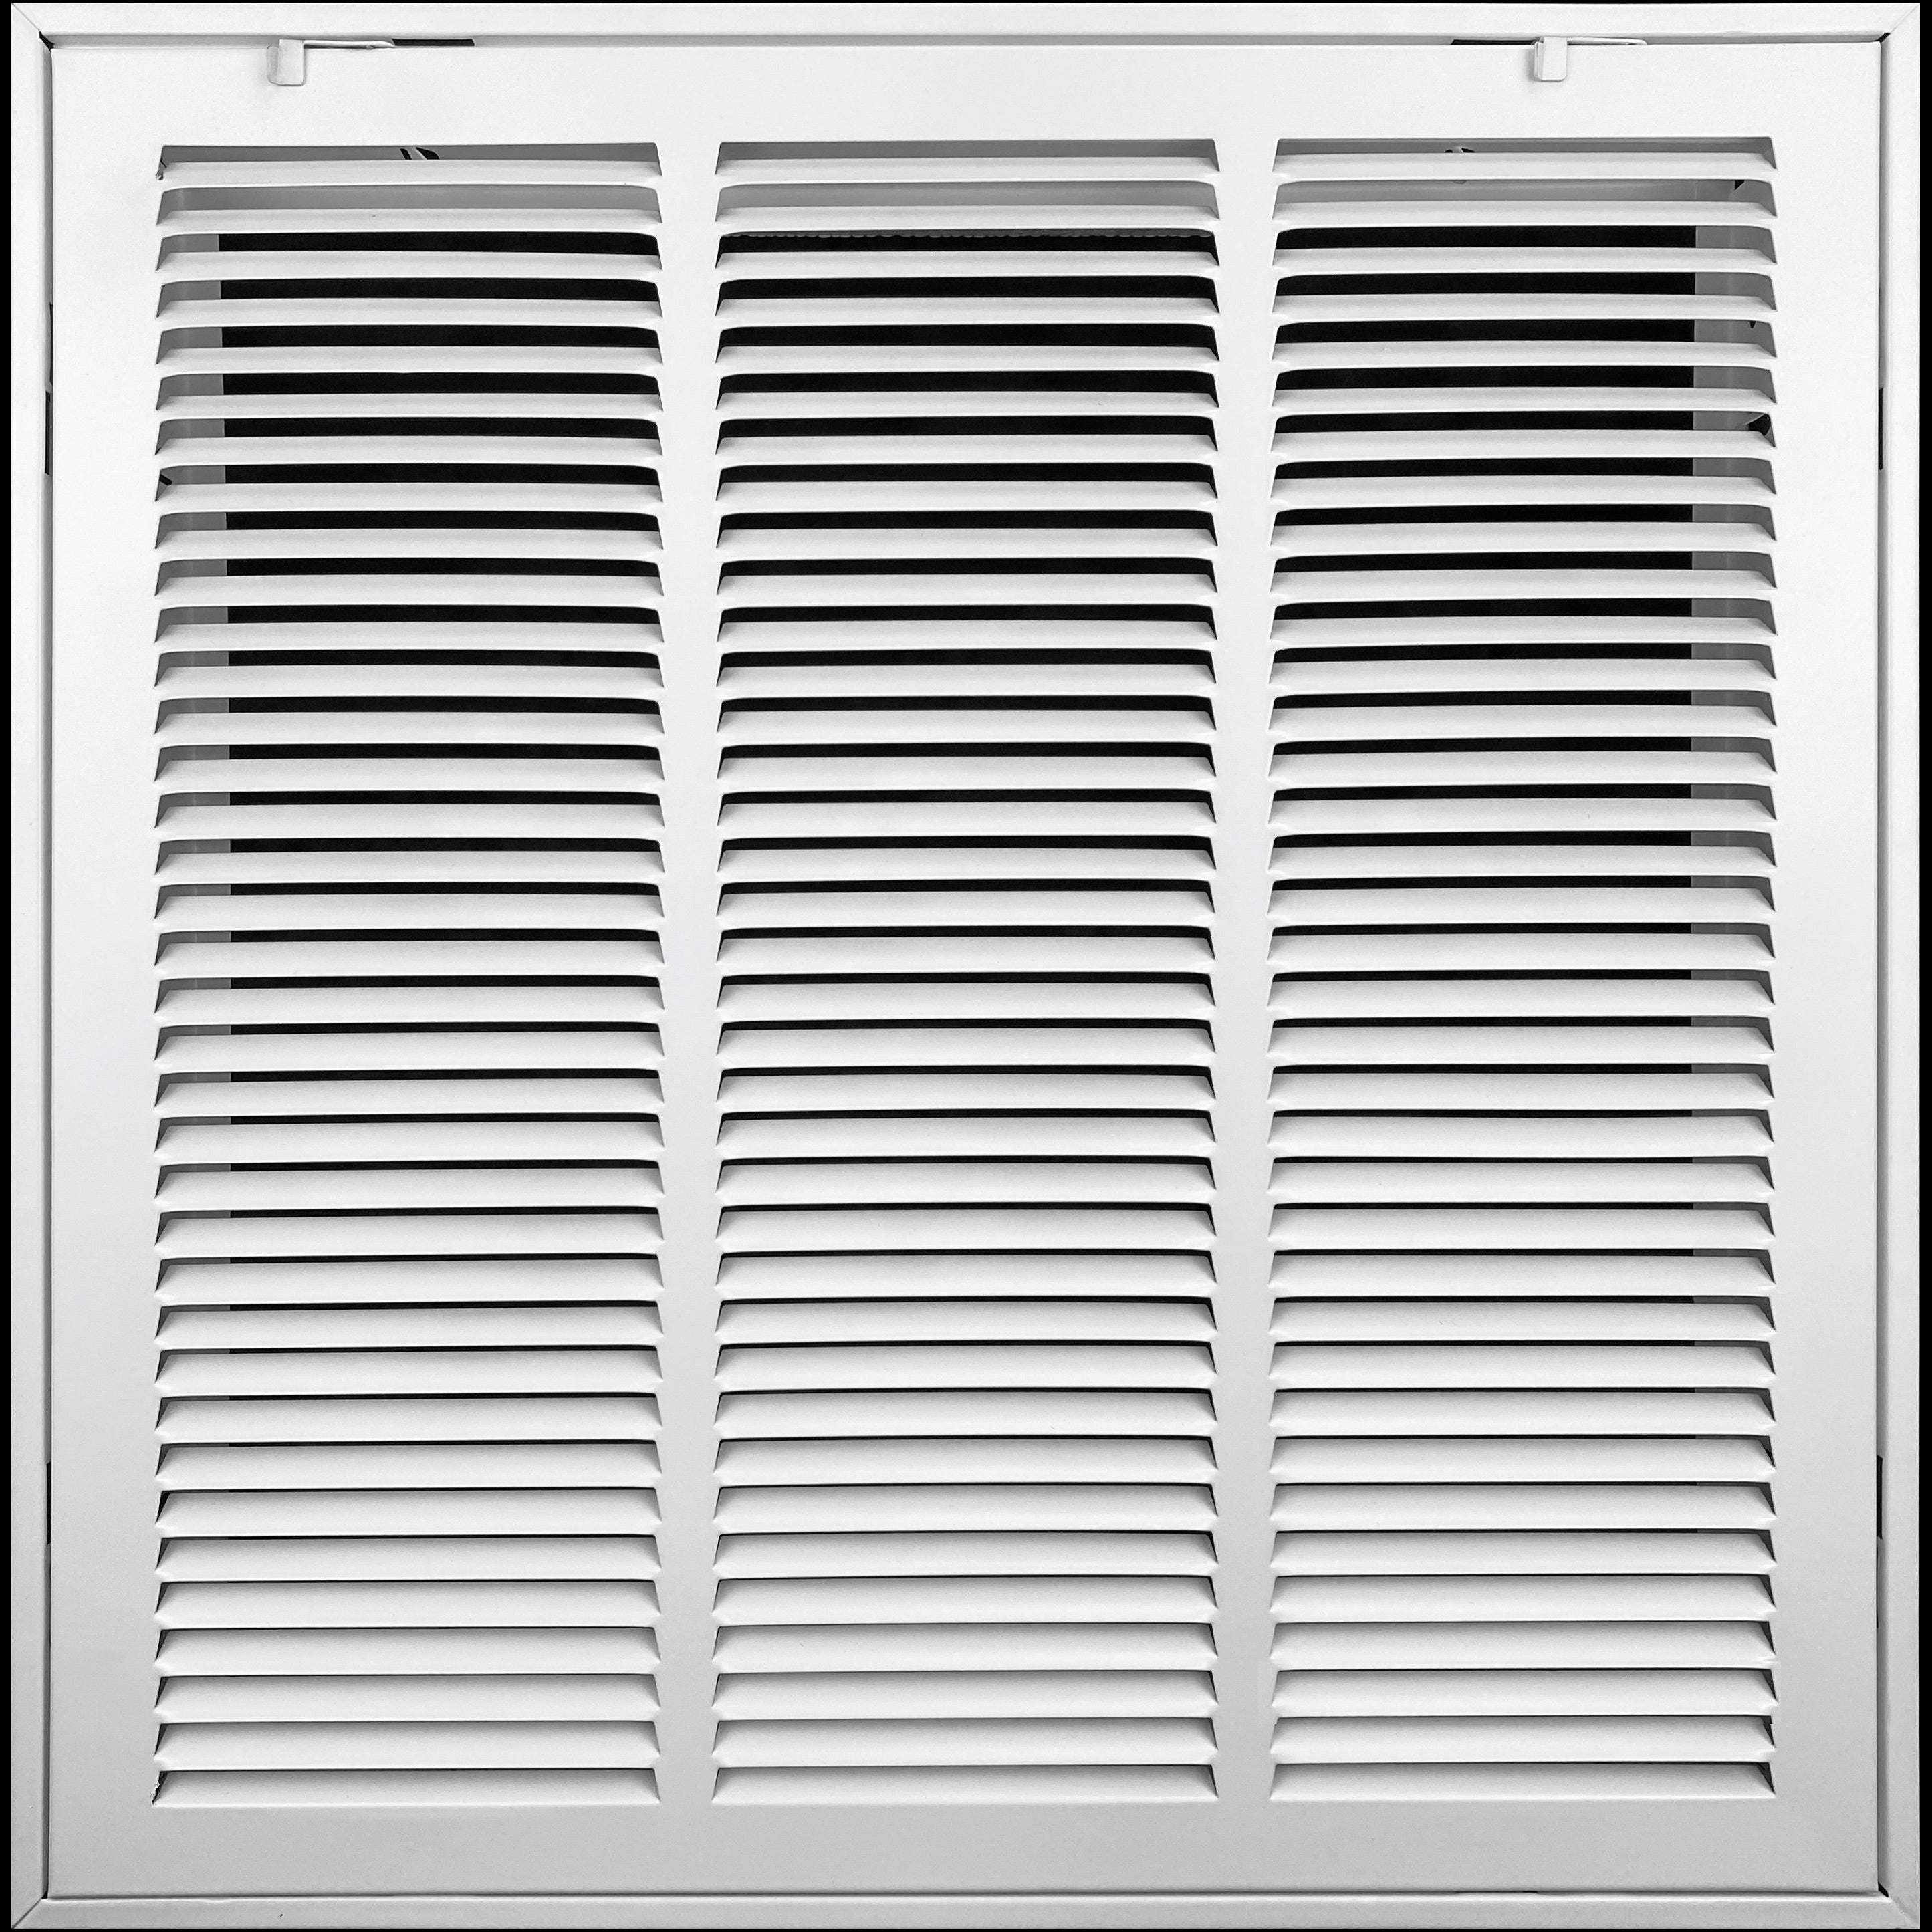 airgrilles 18" x 18" duct opening   hd steel return air filter grille for sidewall and ceiling 7hnd-rfg1-wh-18x18 038775638203 - 1